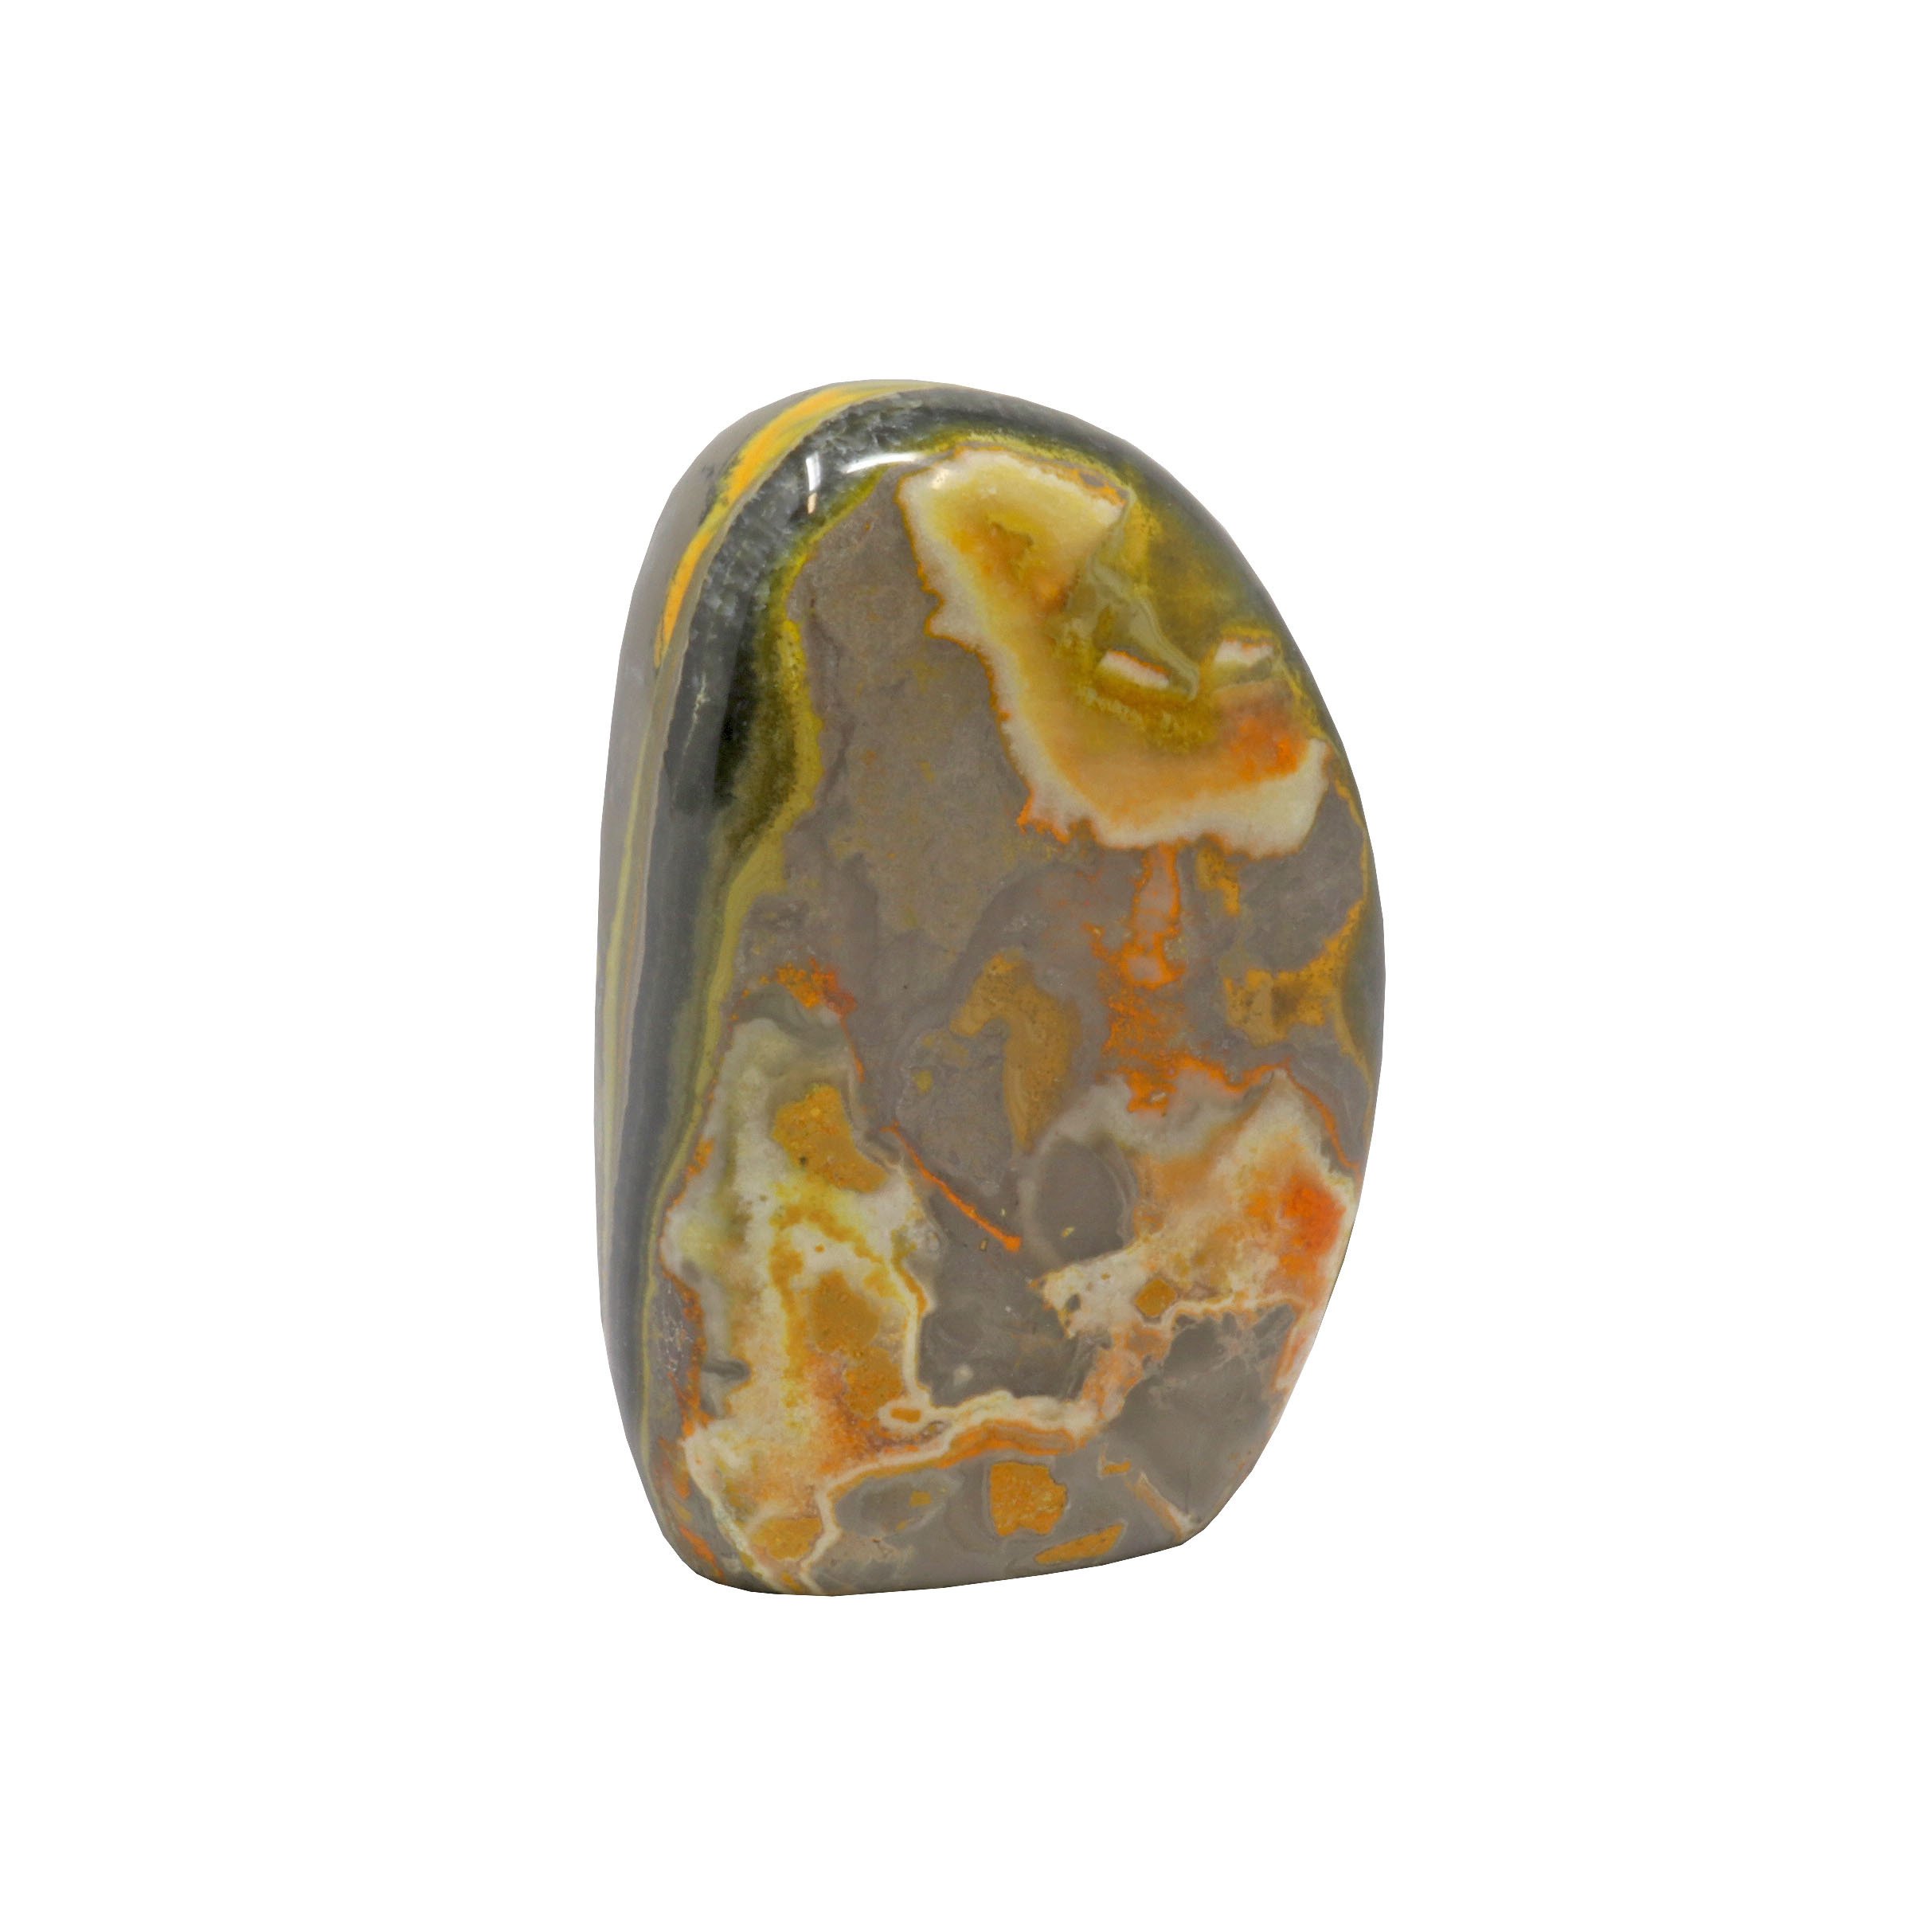 Bumblebee Jasper Freeform Polished Cut Base - Pointed Center With Mustard Yellow Splashes Of Color